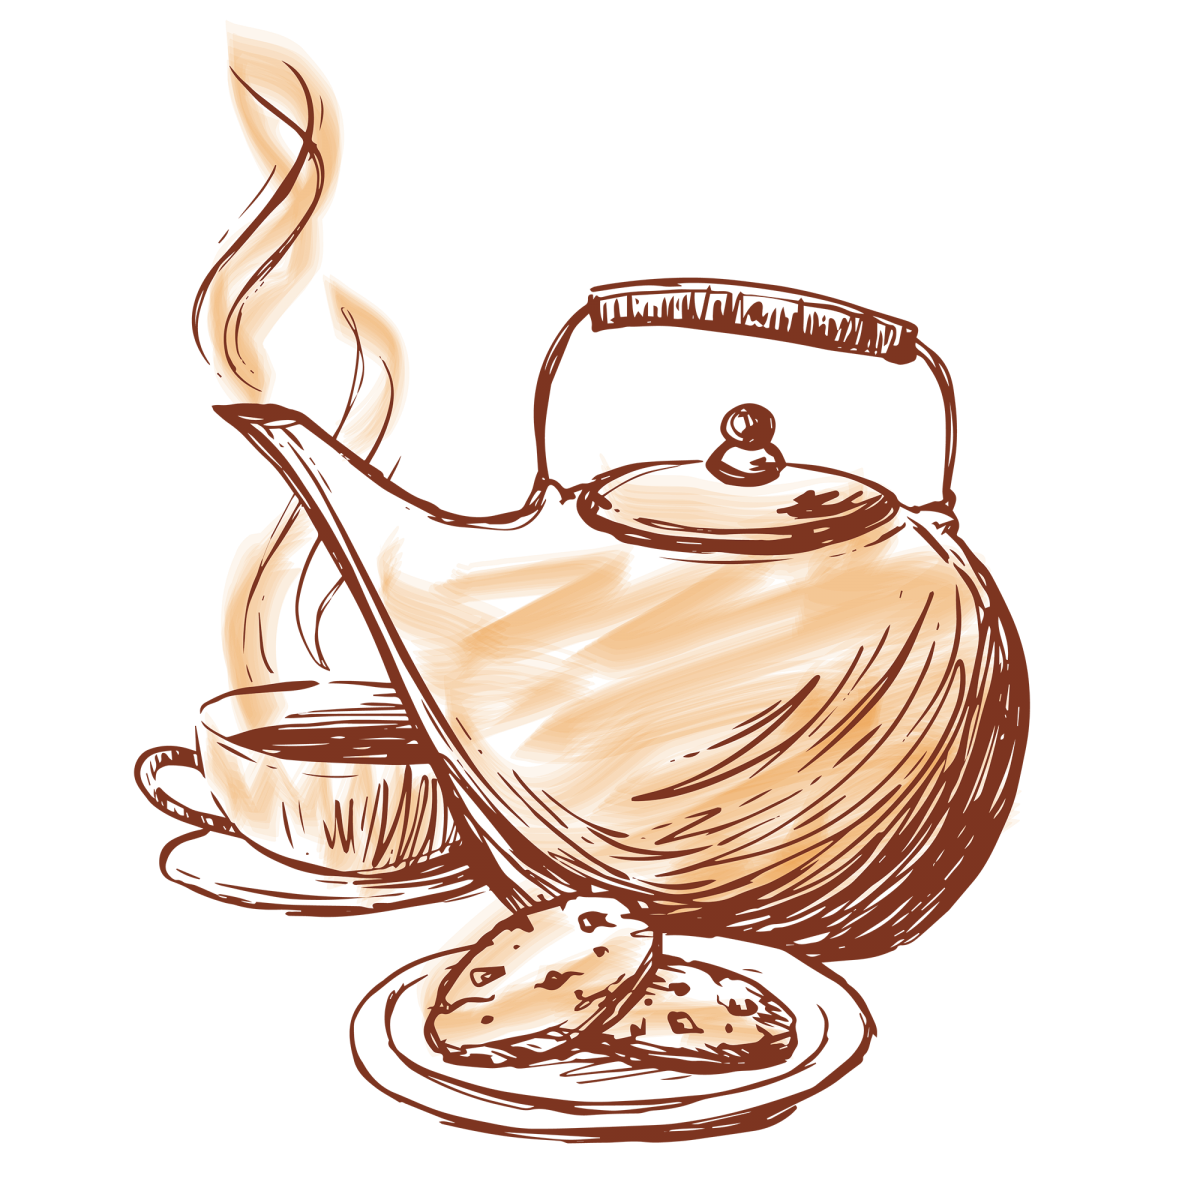 Gold Star teapot and cookies illustration